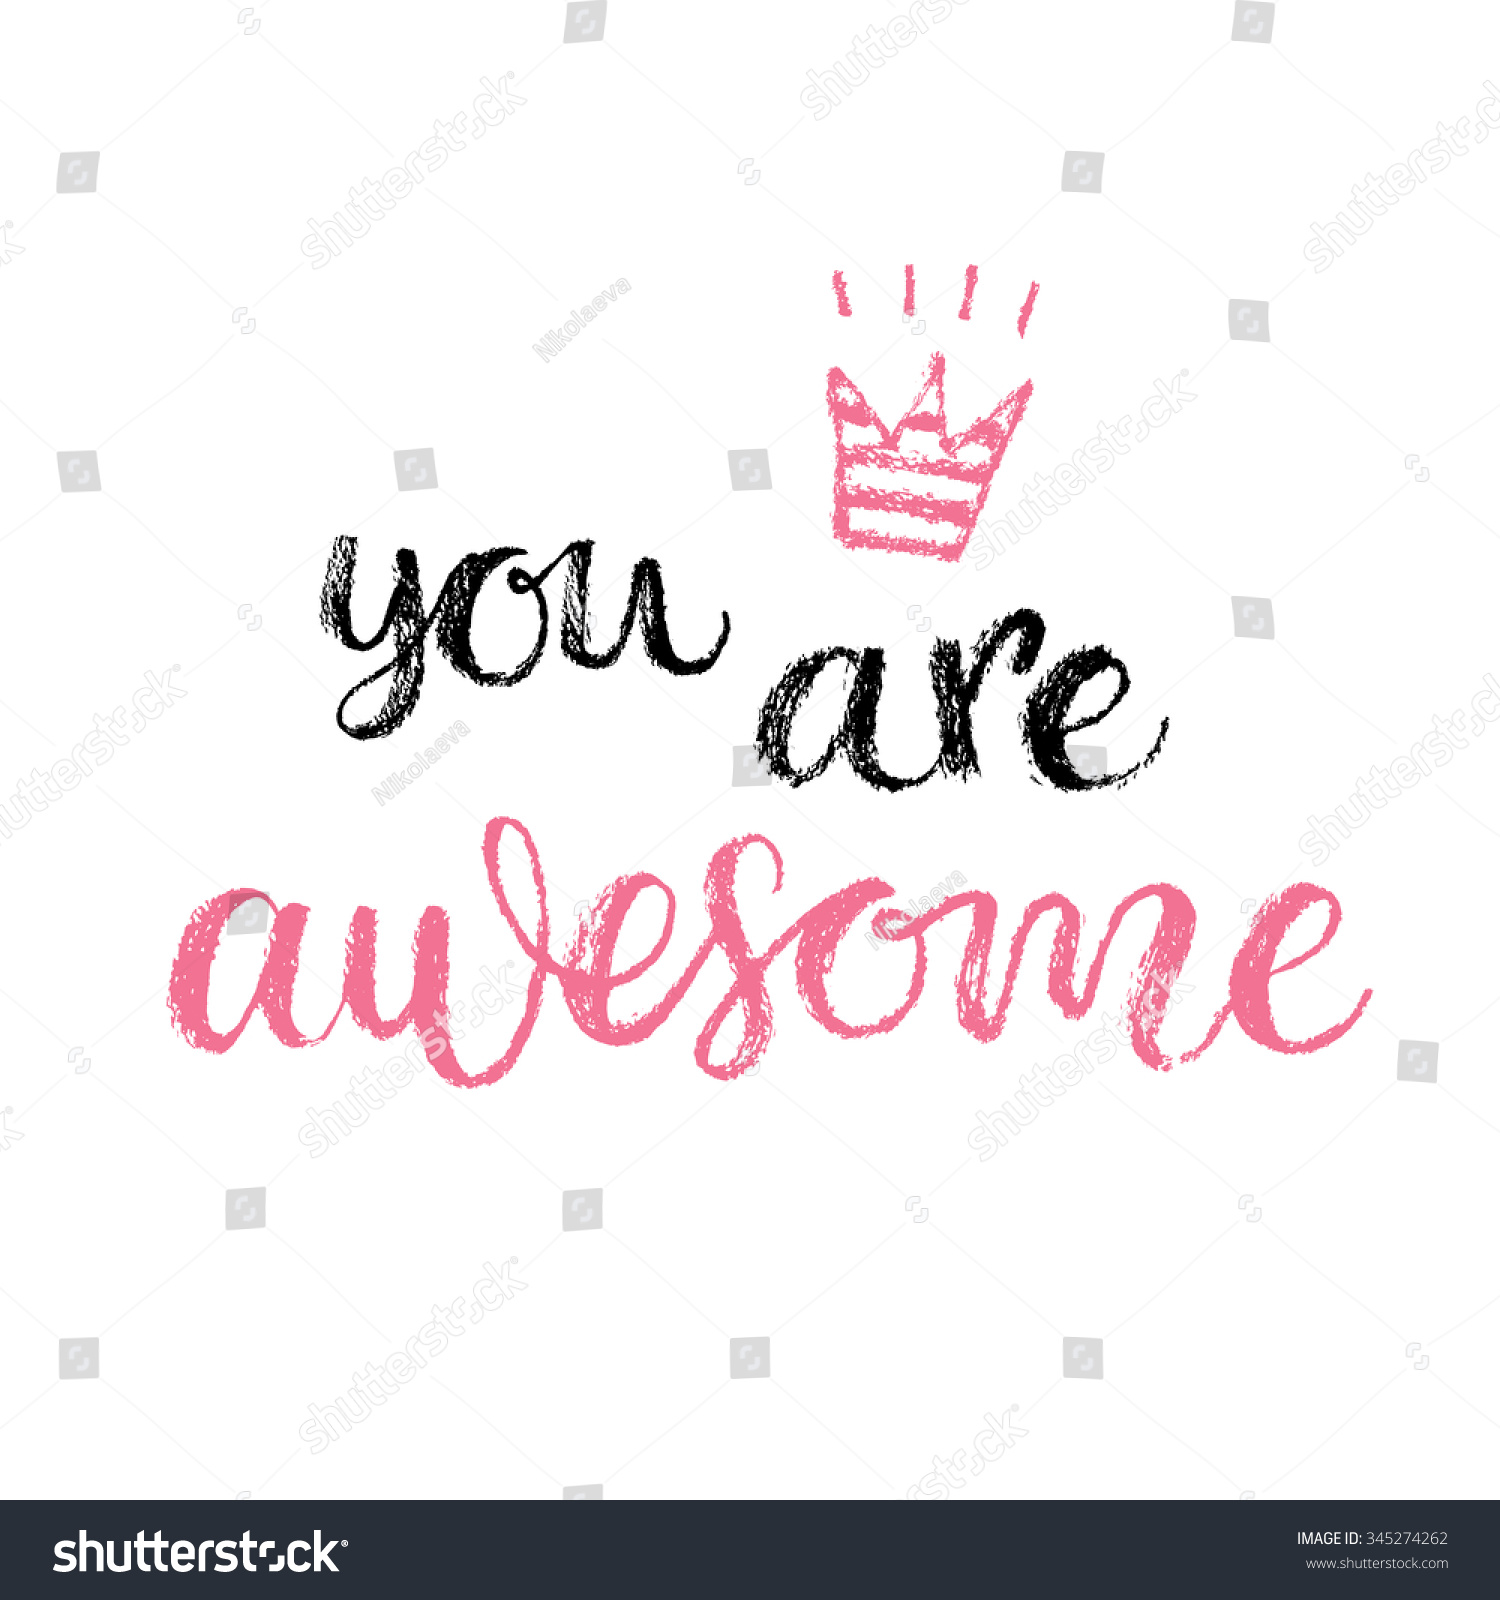 clipart you are awesome - photo #42